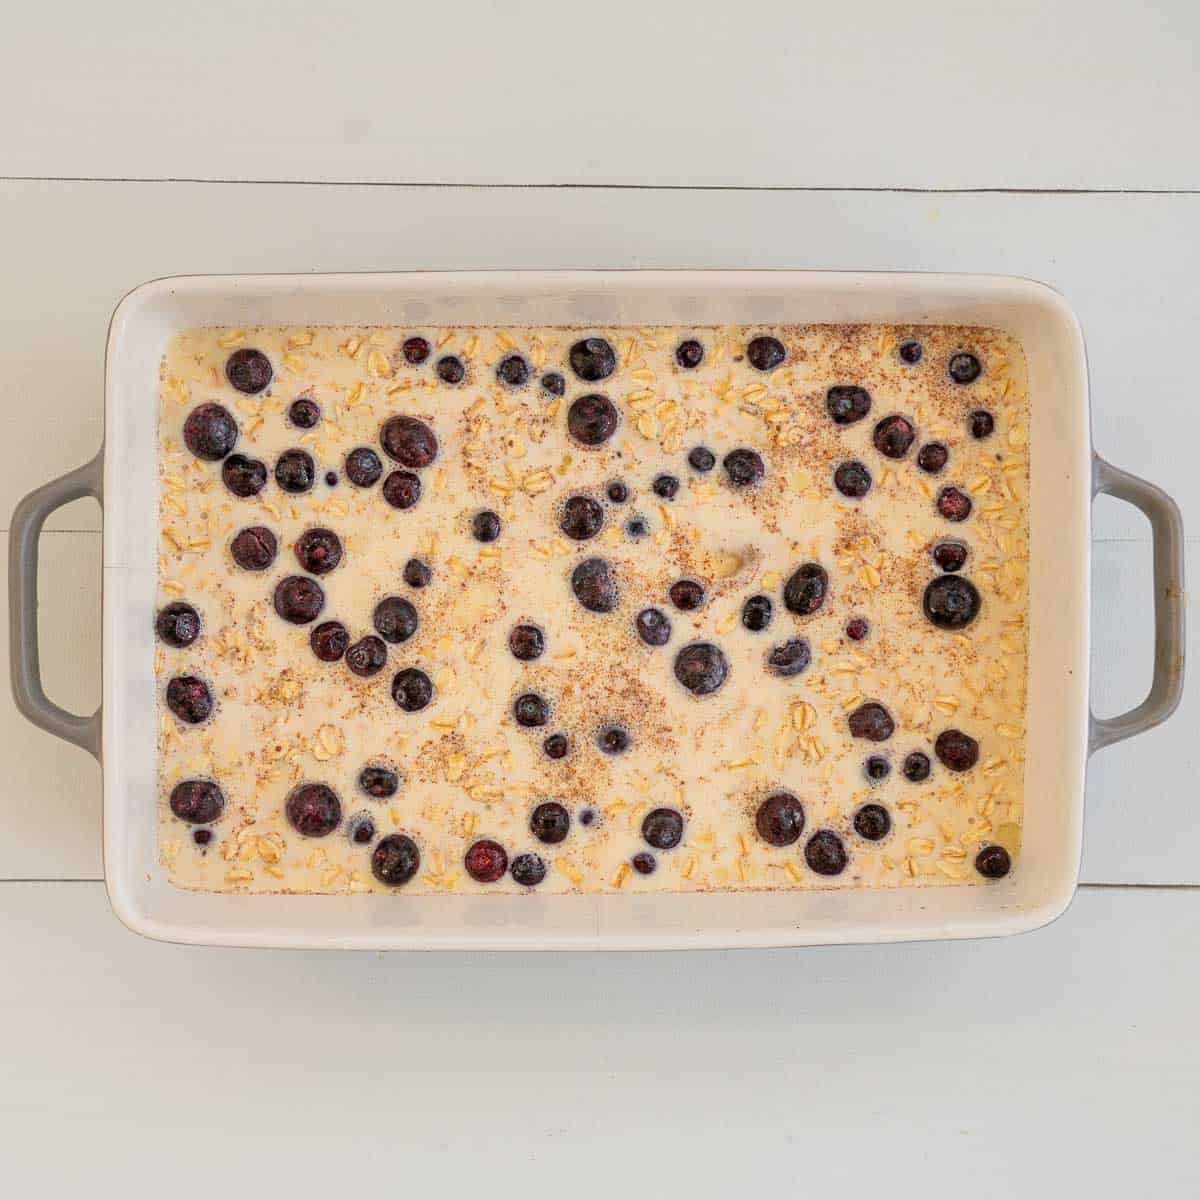 A baking dish of rolled oats, milk, eggs and blueberries ready to be baked in the oven.